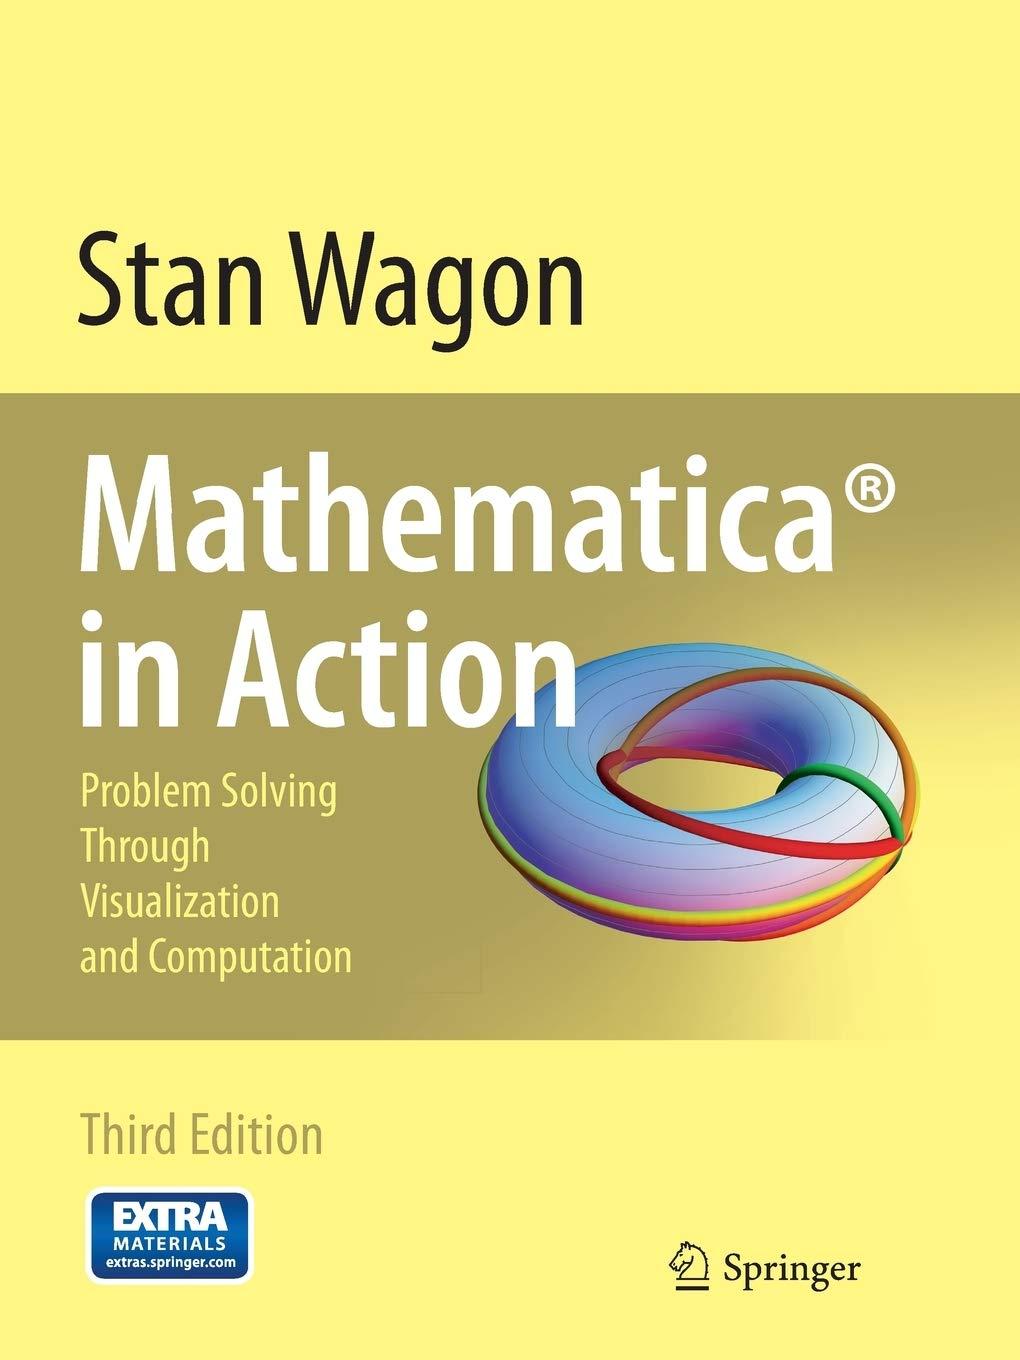 mathematica in action problem solving through visualization and computation 3rd edition stan wagon